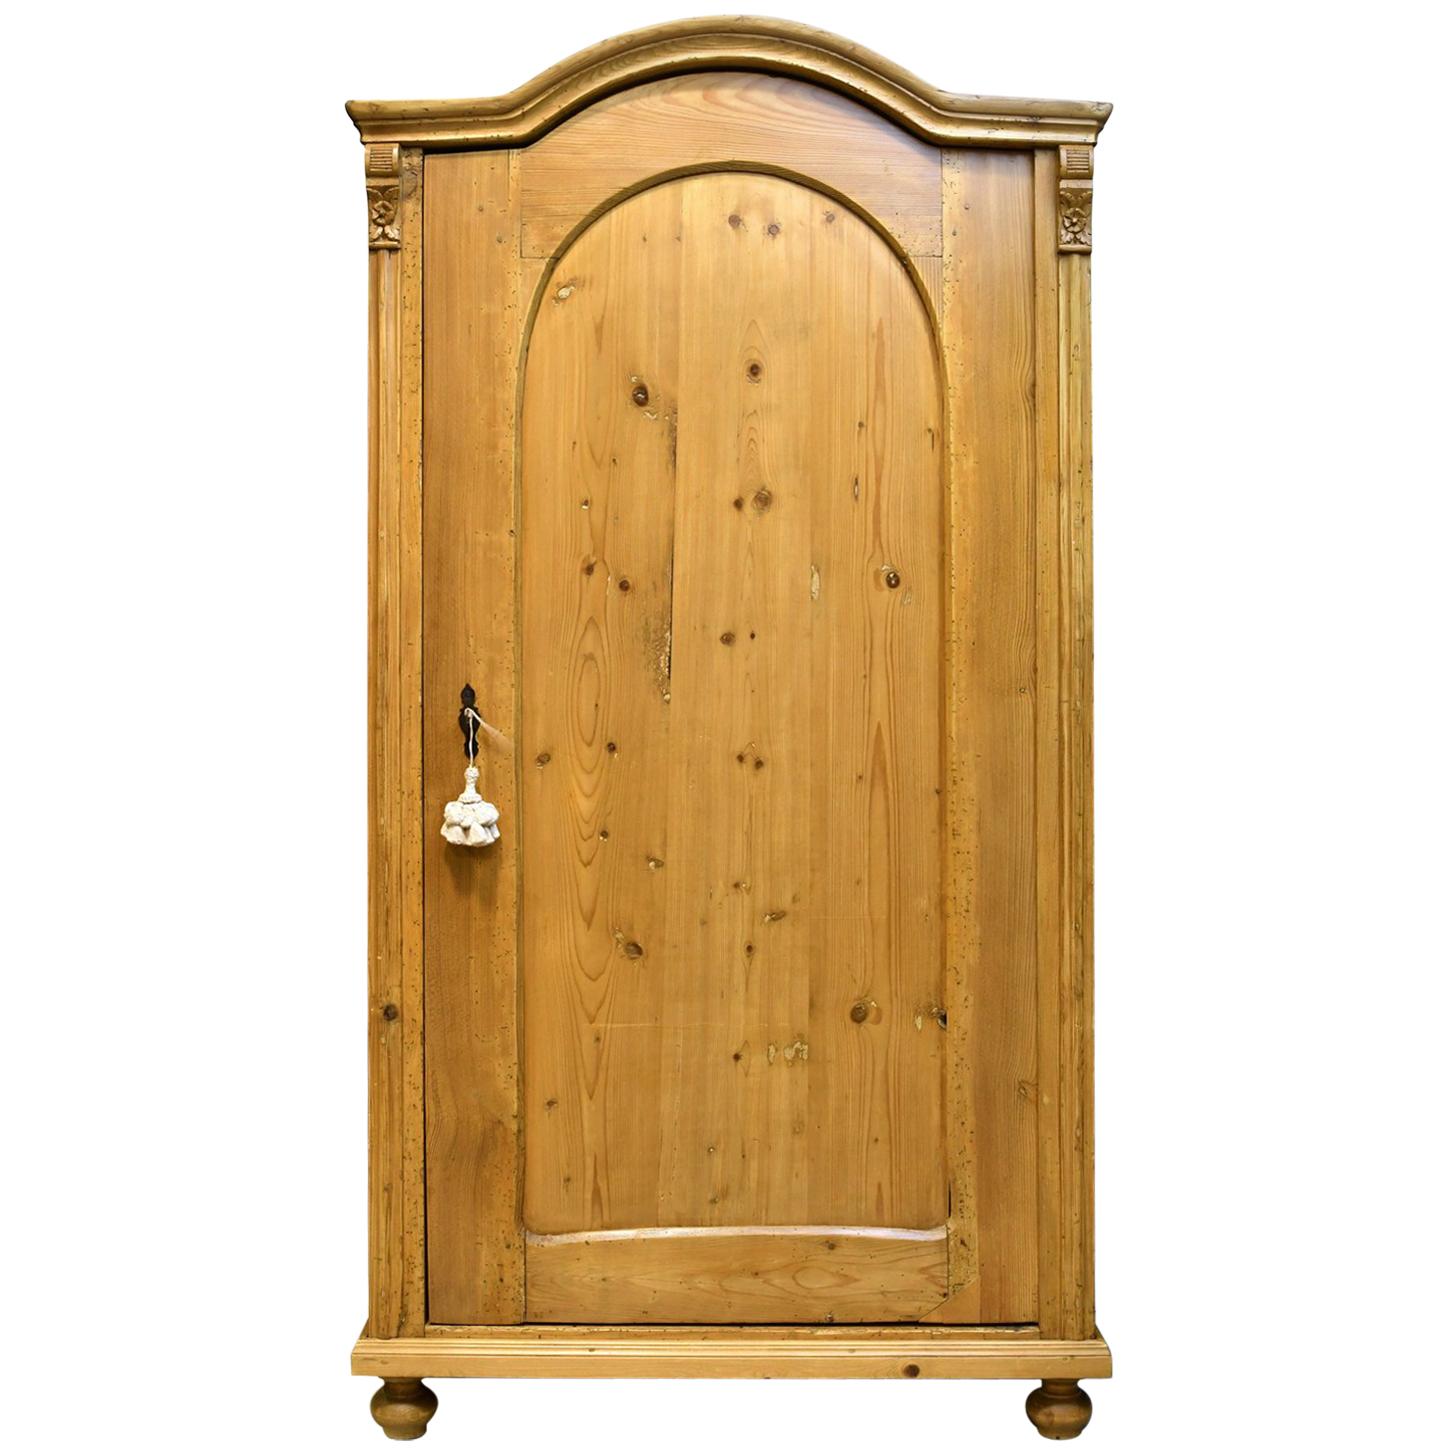 Austrian Armoire in Pine with Single Door and Arched Top, circa 1830